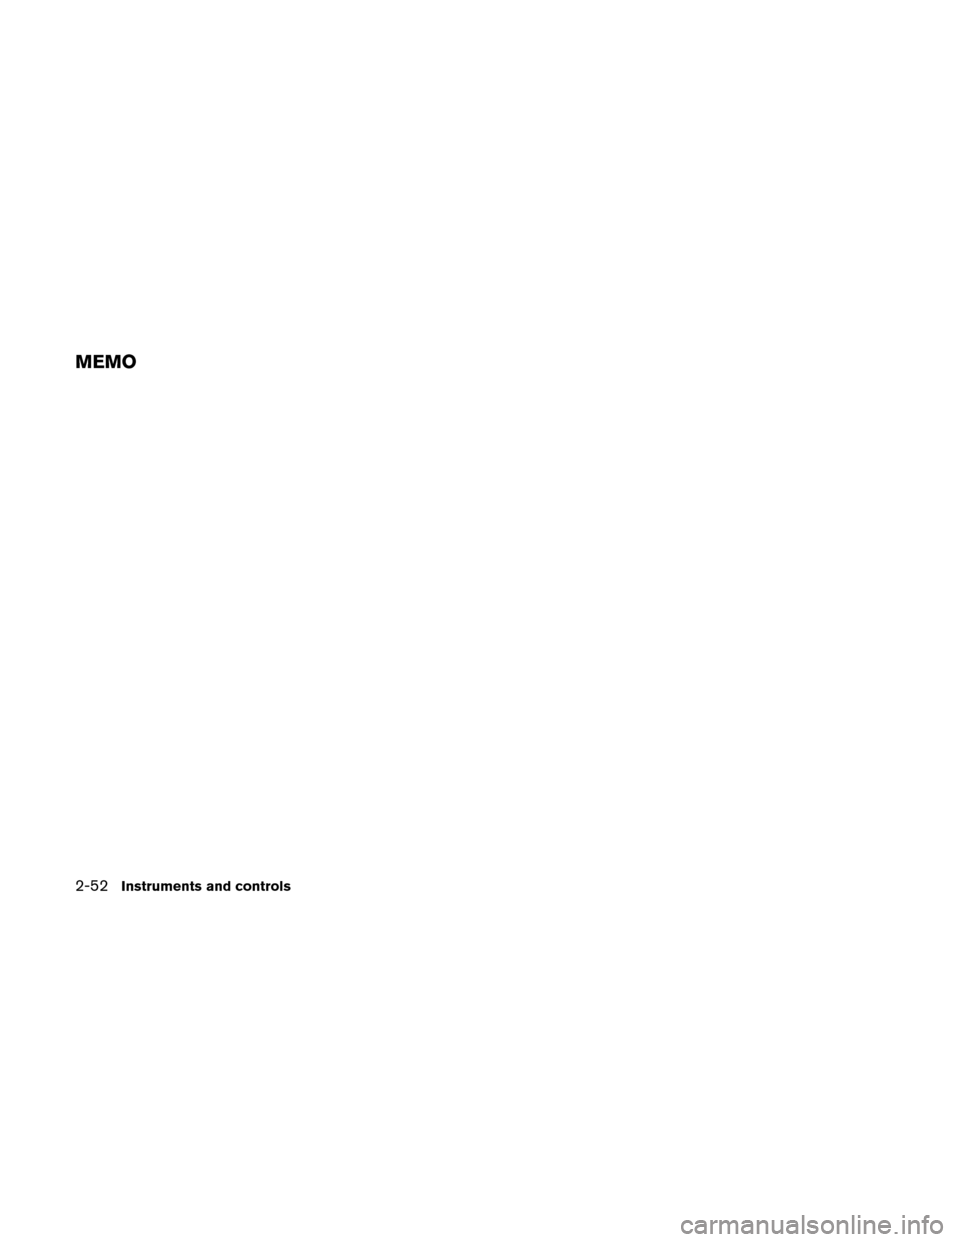 NISSAN ALTIMA HYBRID 2011 L32A / 4.G Owners Manual MEMO
2-52Instruments and controls 